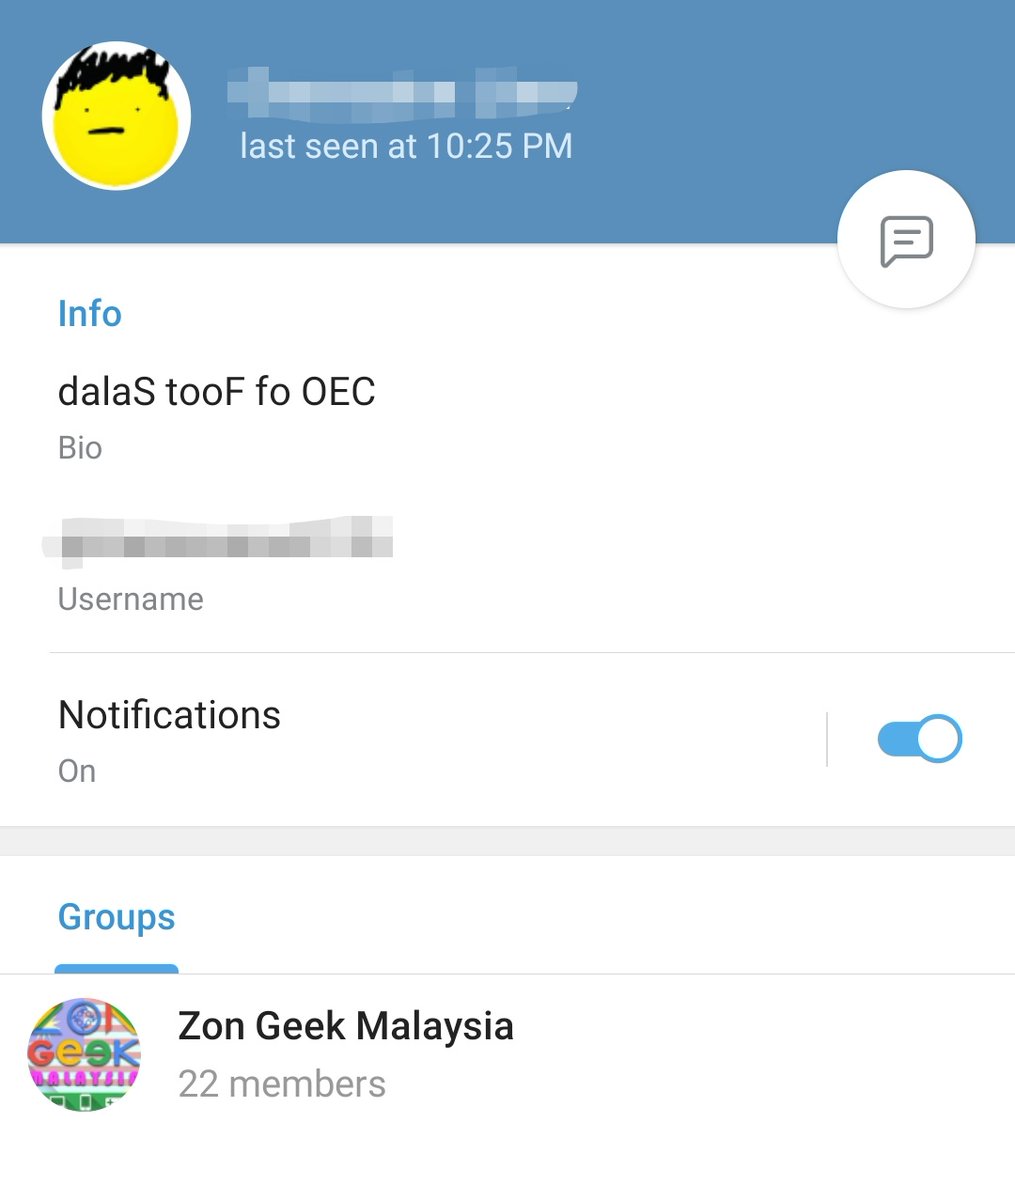 Which is especially useful in groups. In a WhatsApp group everyone can see your phone number. In a Telegram group nobody will see your number unless you are mutual contacts. This is such an important privacy feature that doesn't get enough attention.